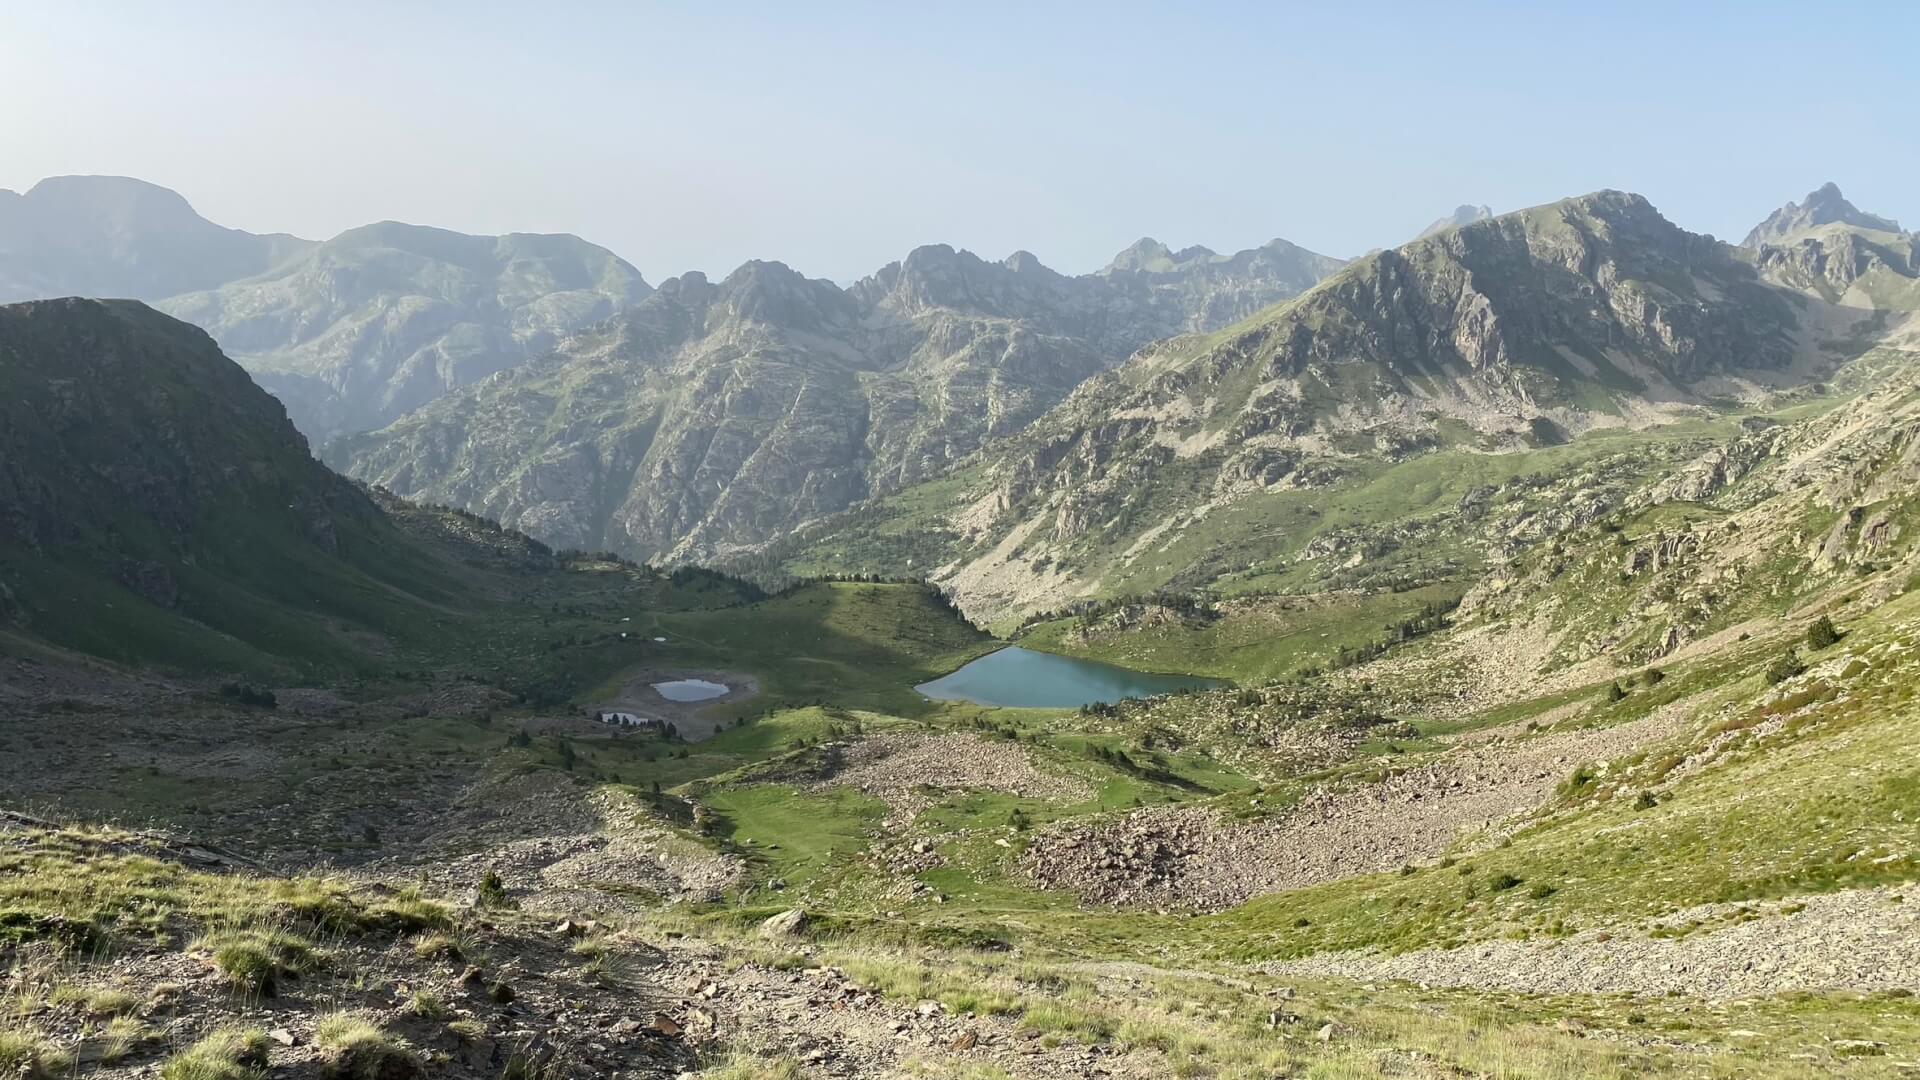 REVISED – PYRENEES SOLO FAST-HIKE KIT LIST